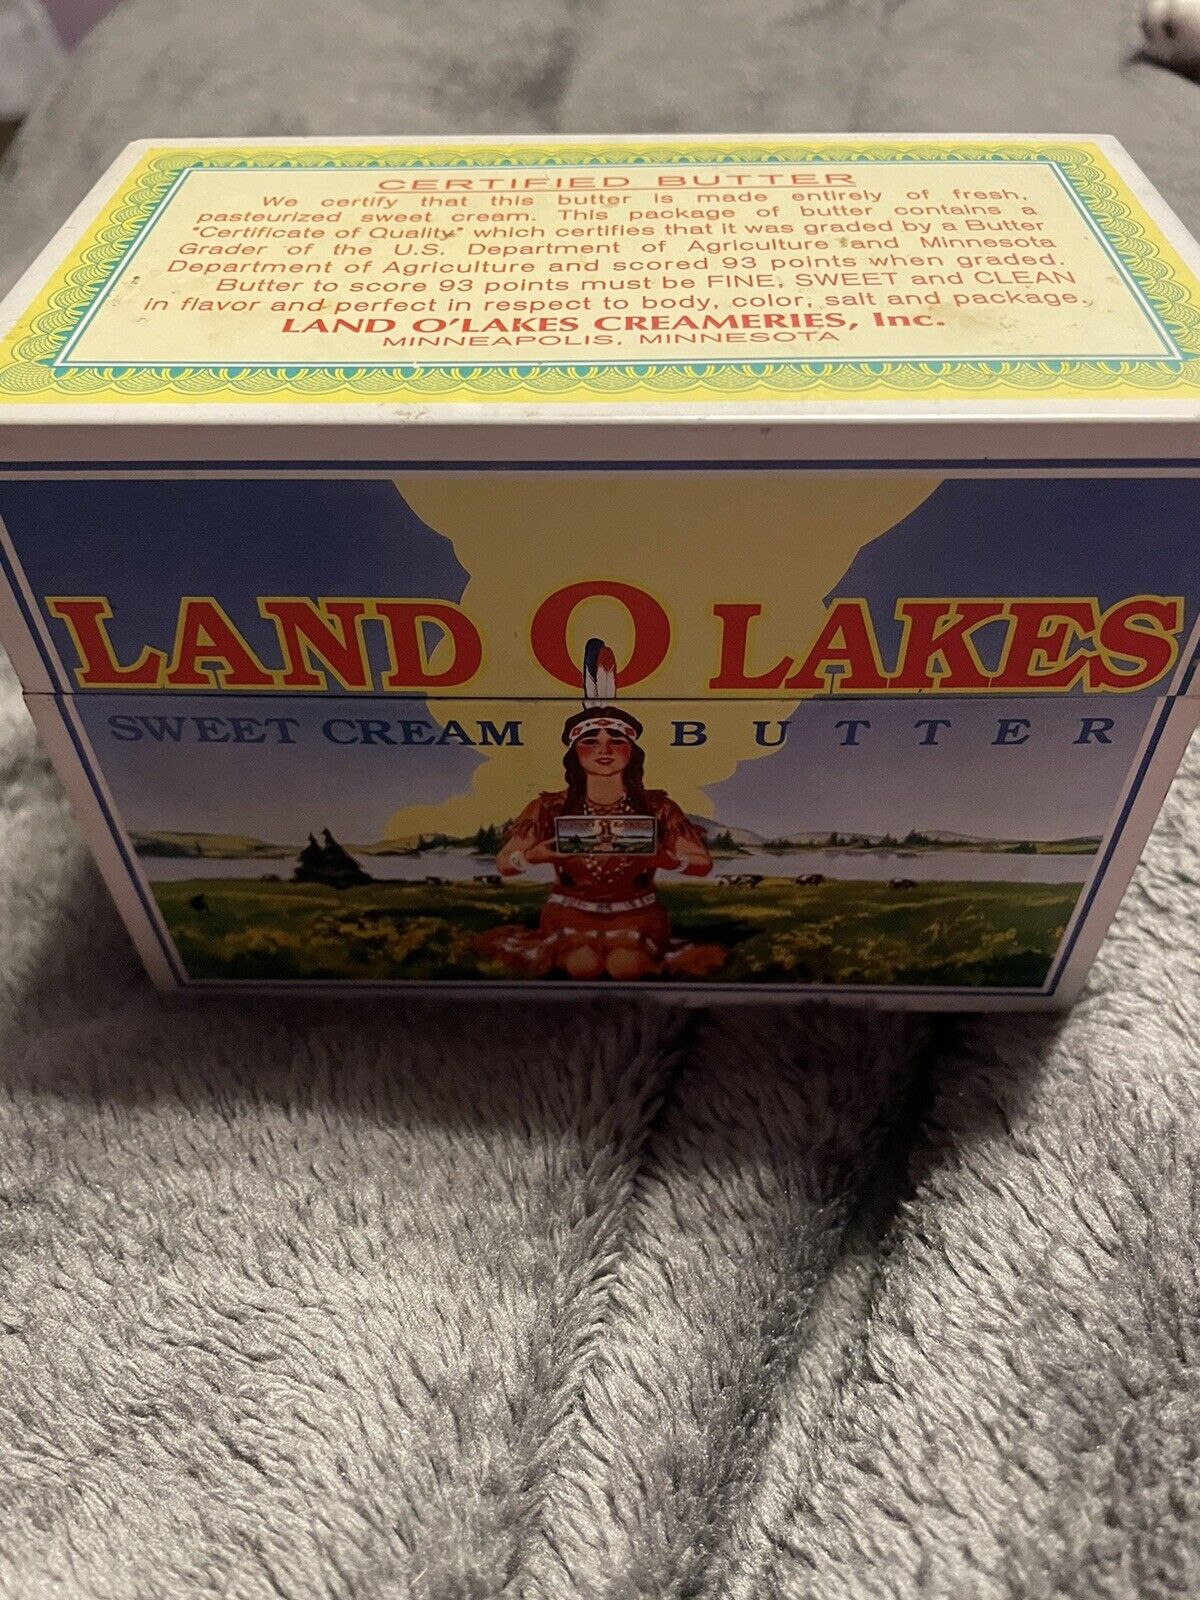 Vintage Land O Lakes Butter Metal Recipe Box. Includes Few Recipes.